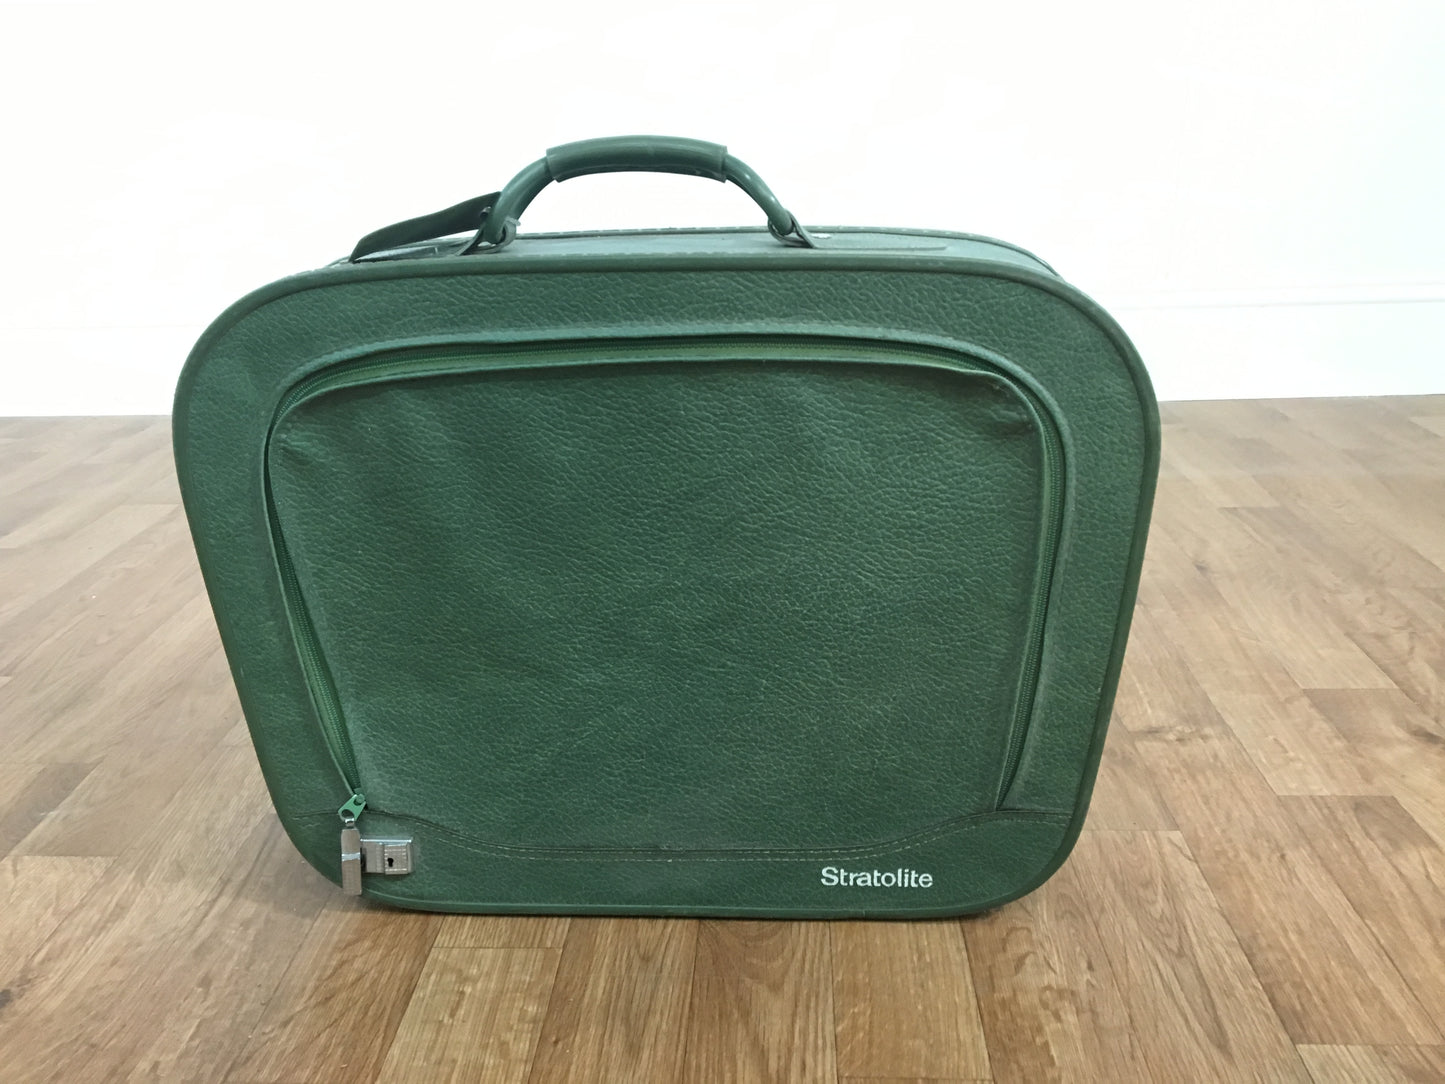 VINTAGE LUGGAGE, FADED GREEN